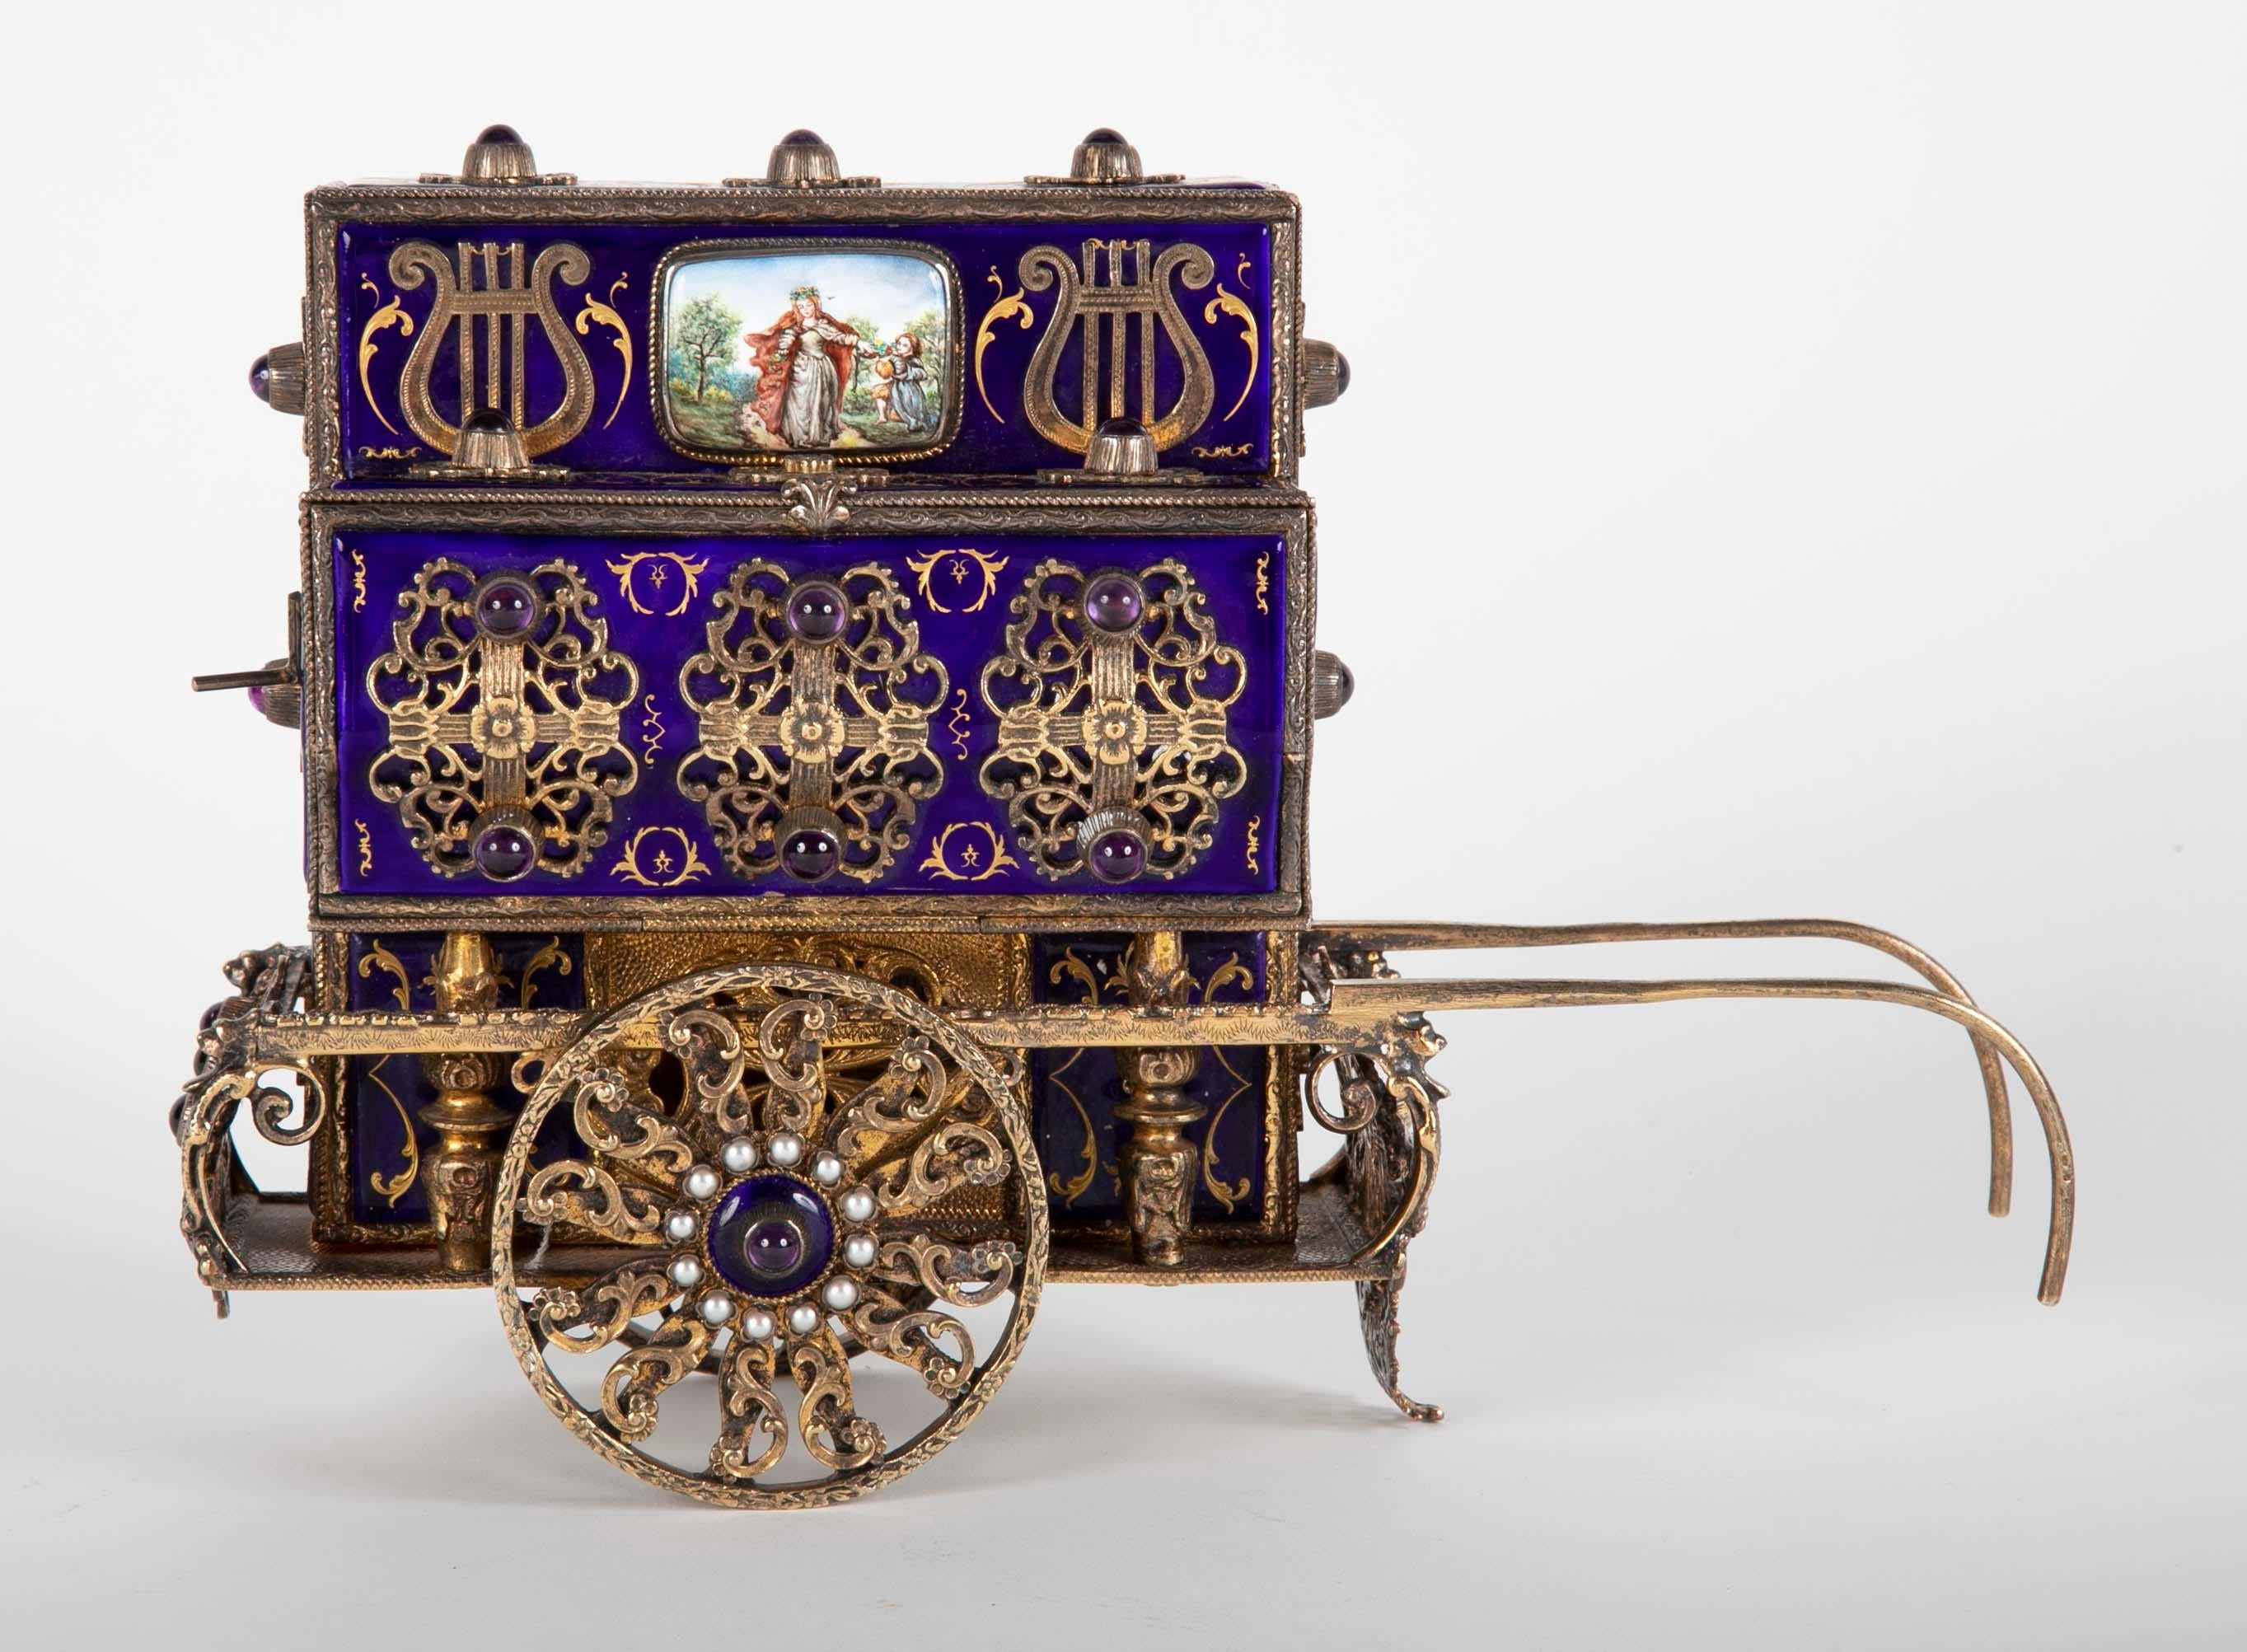 Charles Reuge enamel on sterling silver Swiss antique box in the form of an Organ Grinder's Cart. This piece is one of the rarest of his works using the finest materials including real pearls, sterling silver and cabochon amethyst. Marked Reuge.